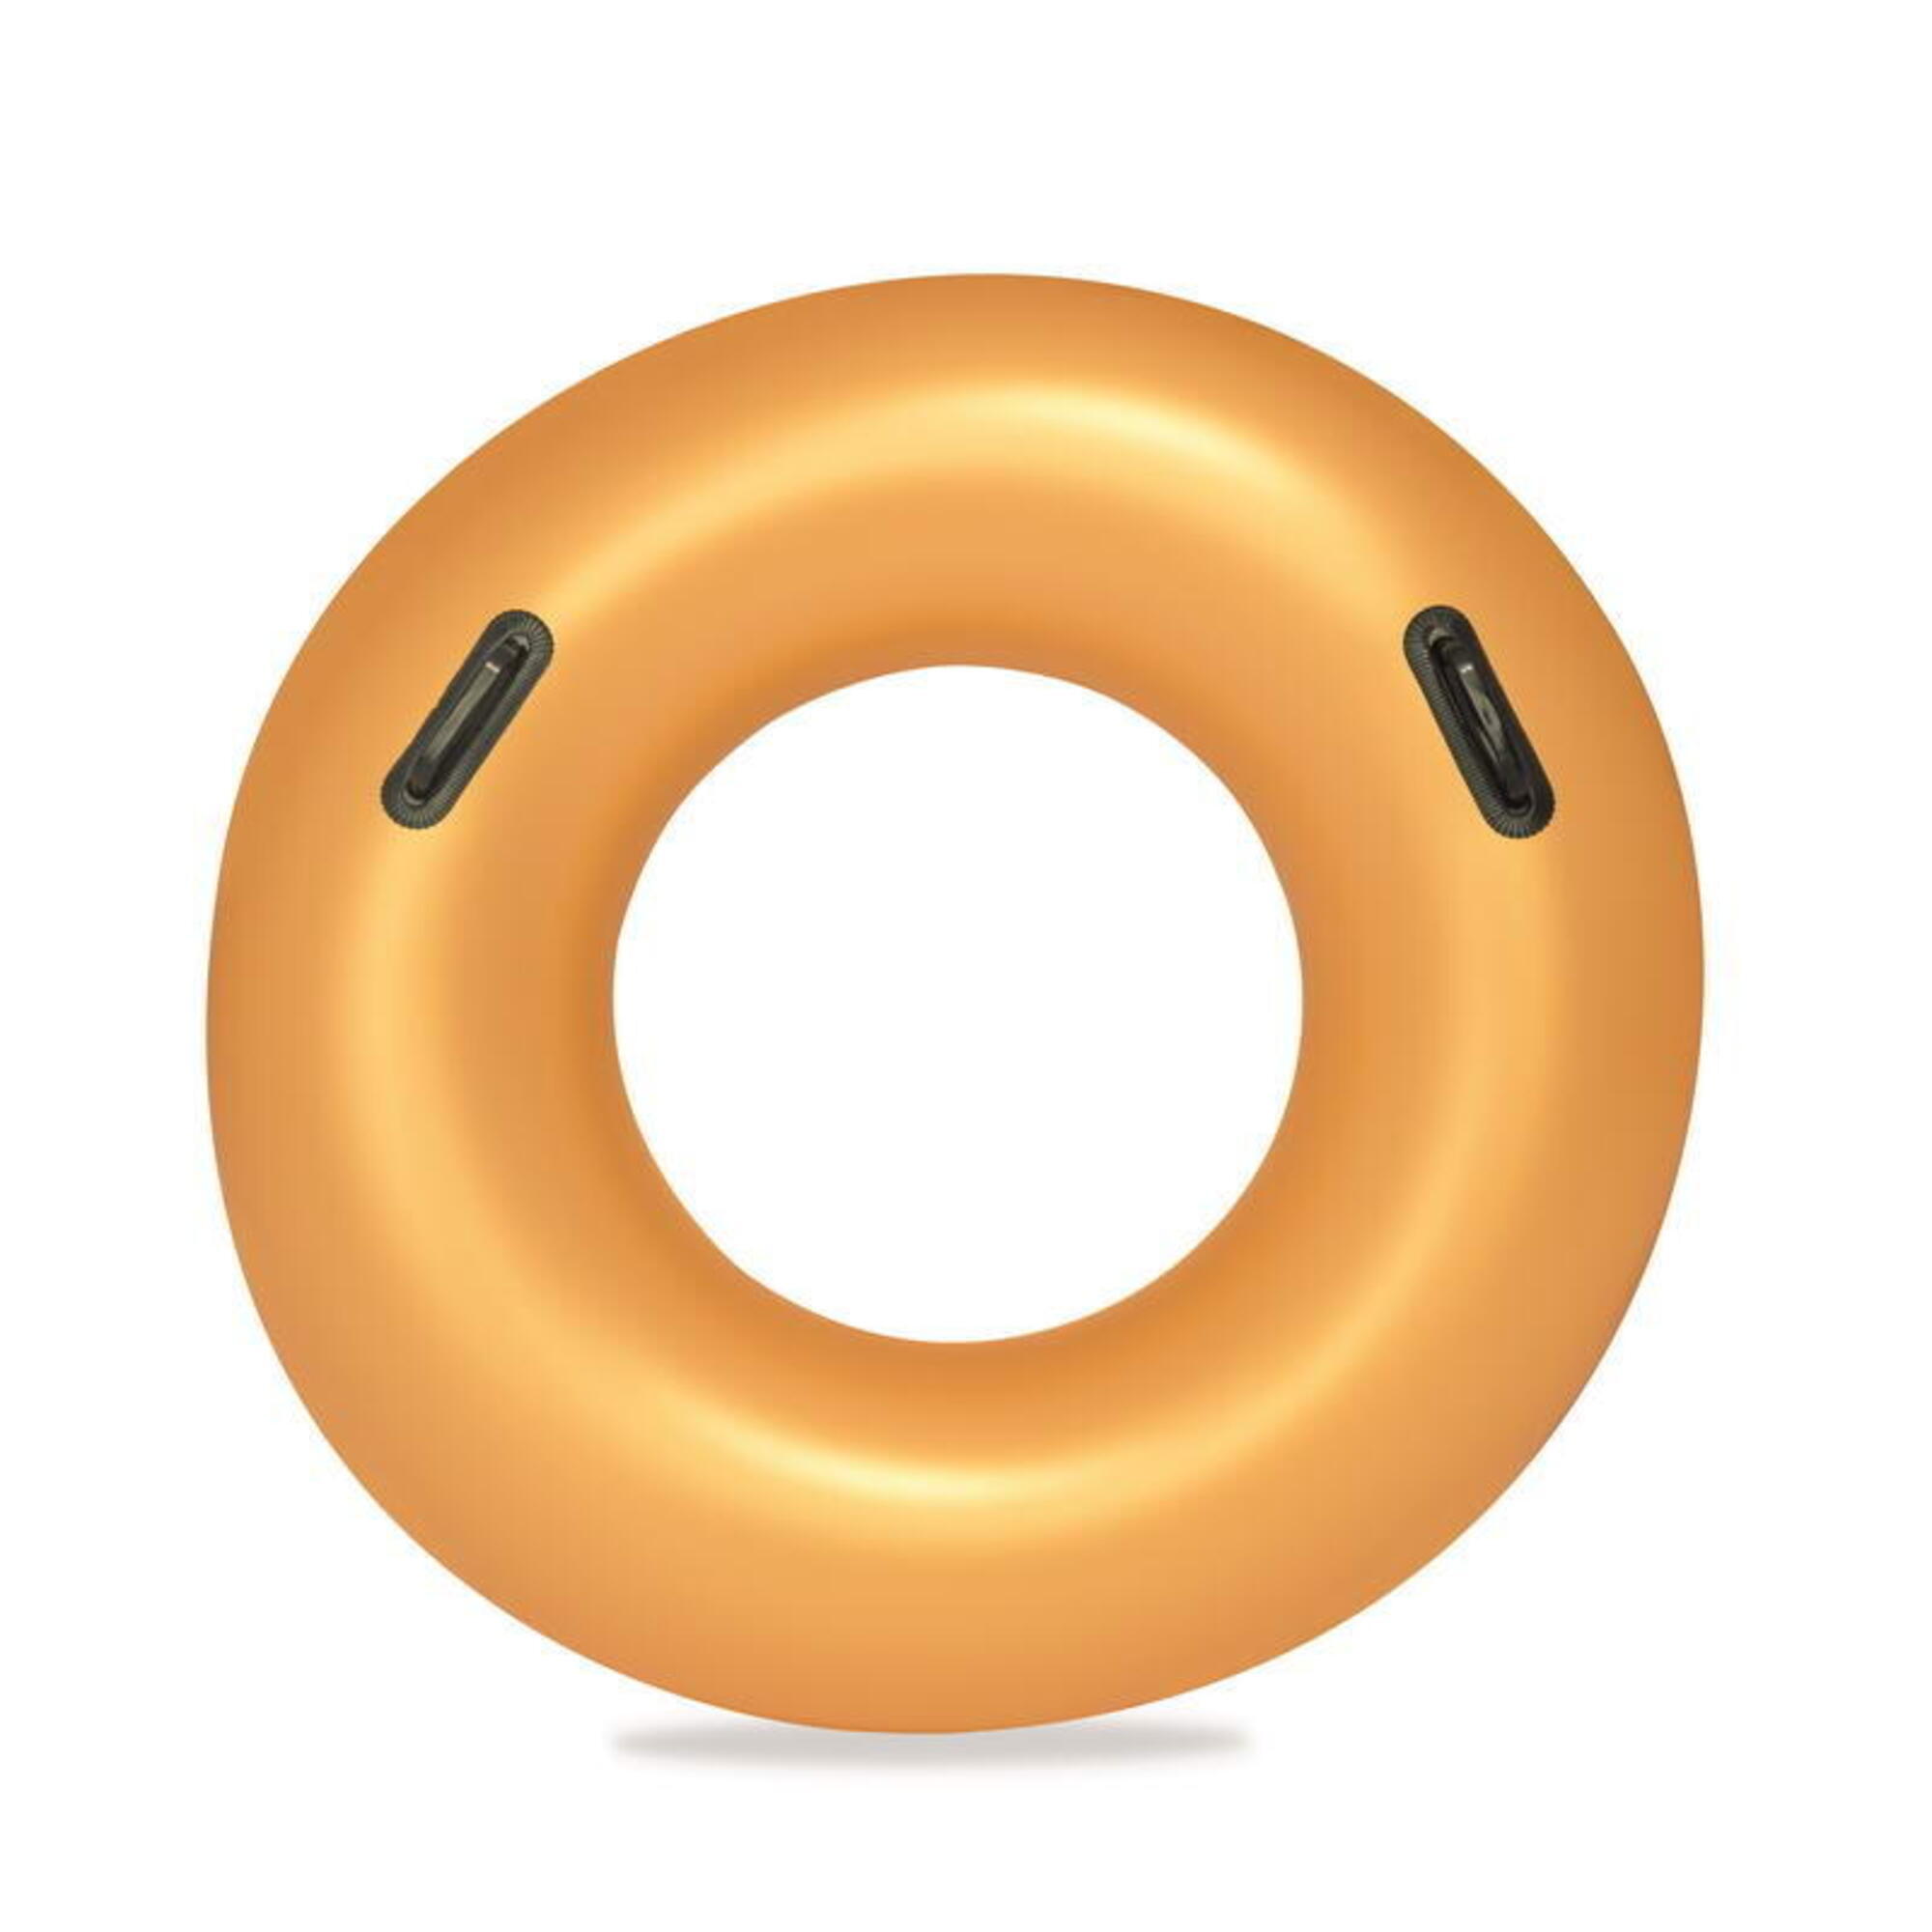 Bestway Gold Swim Ring 36" with handles - Gold